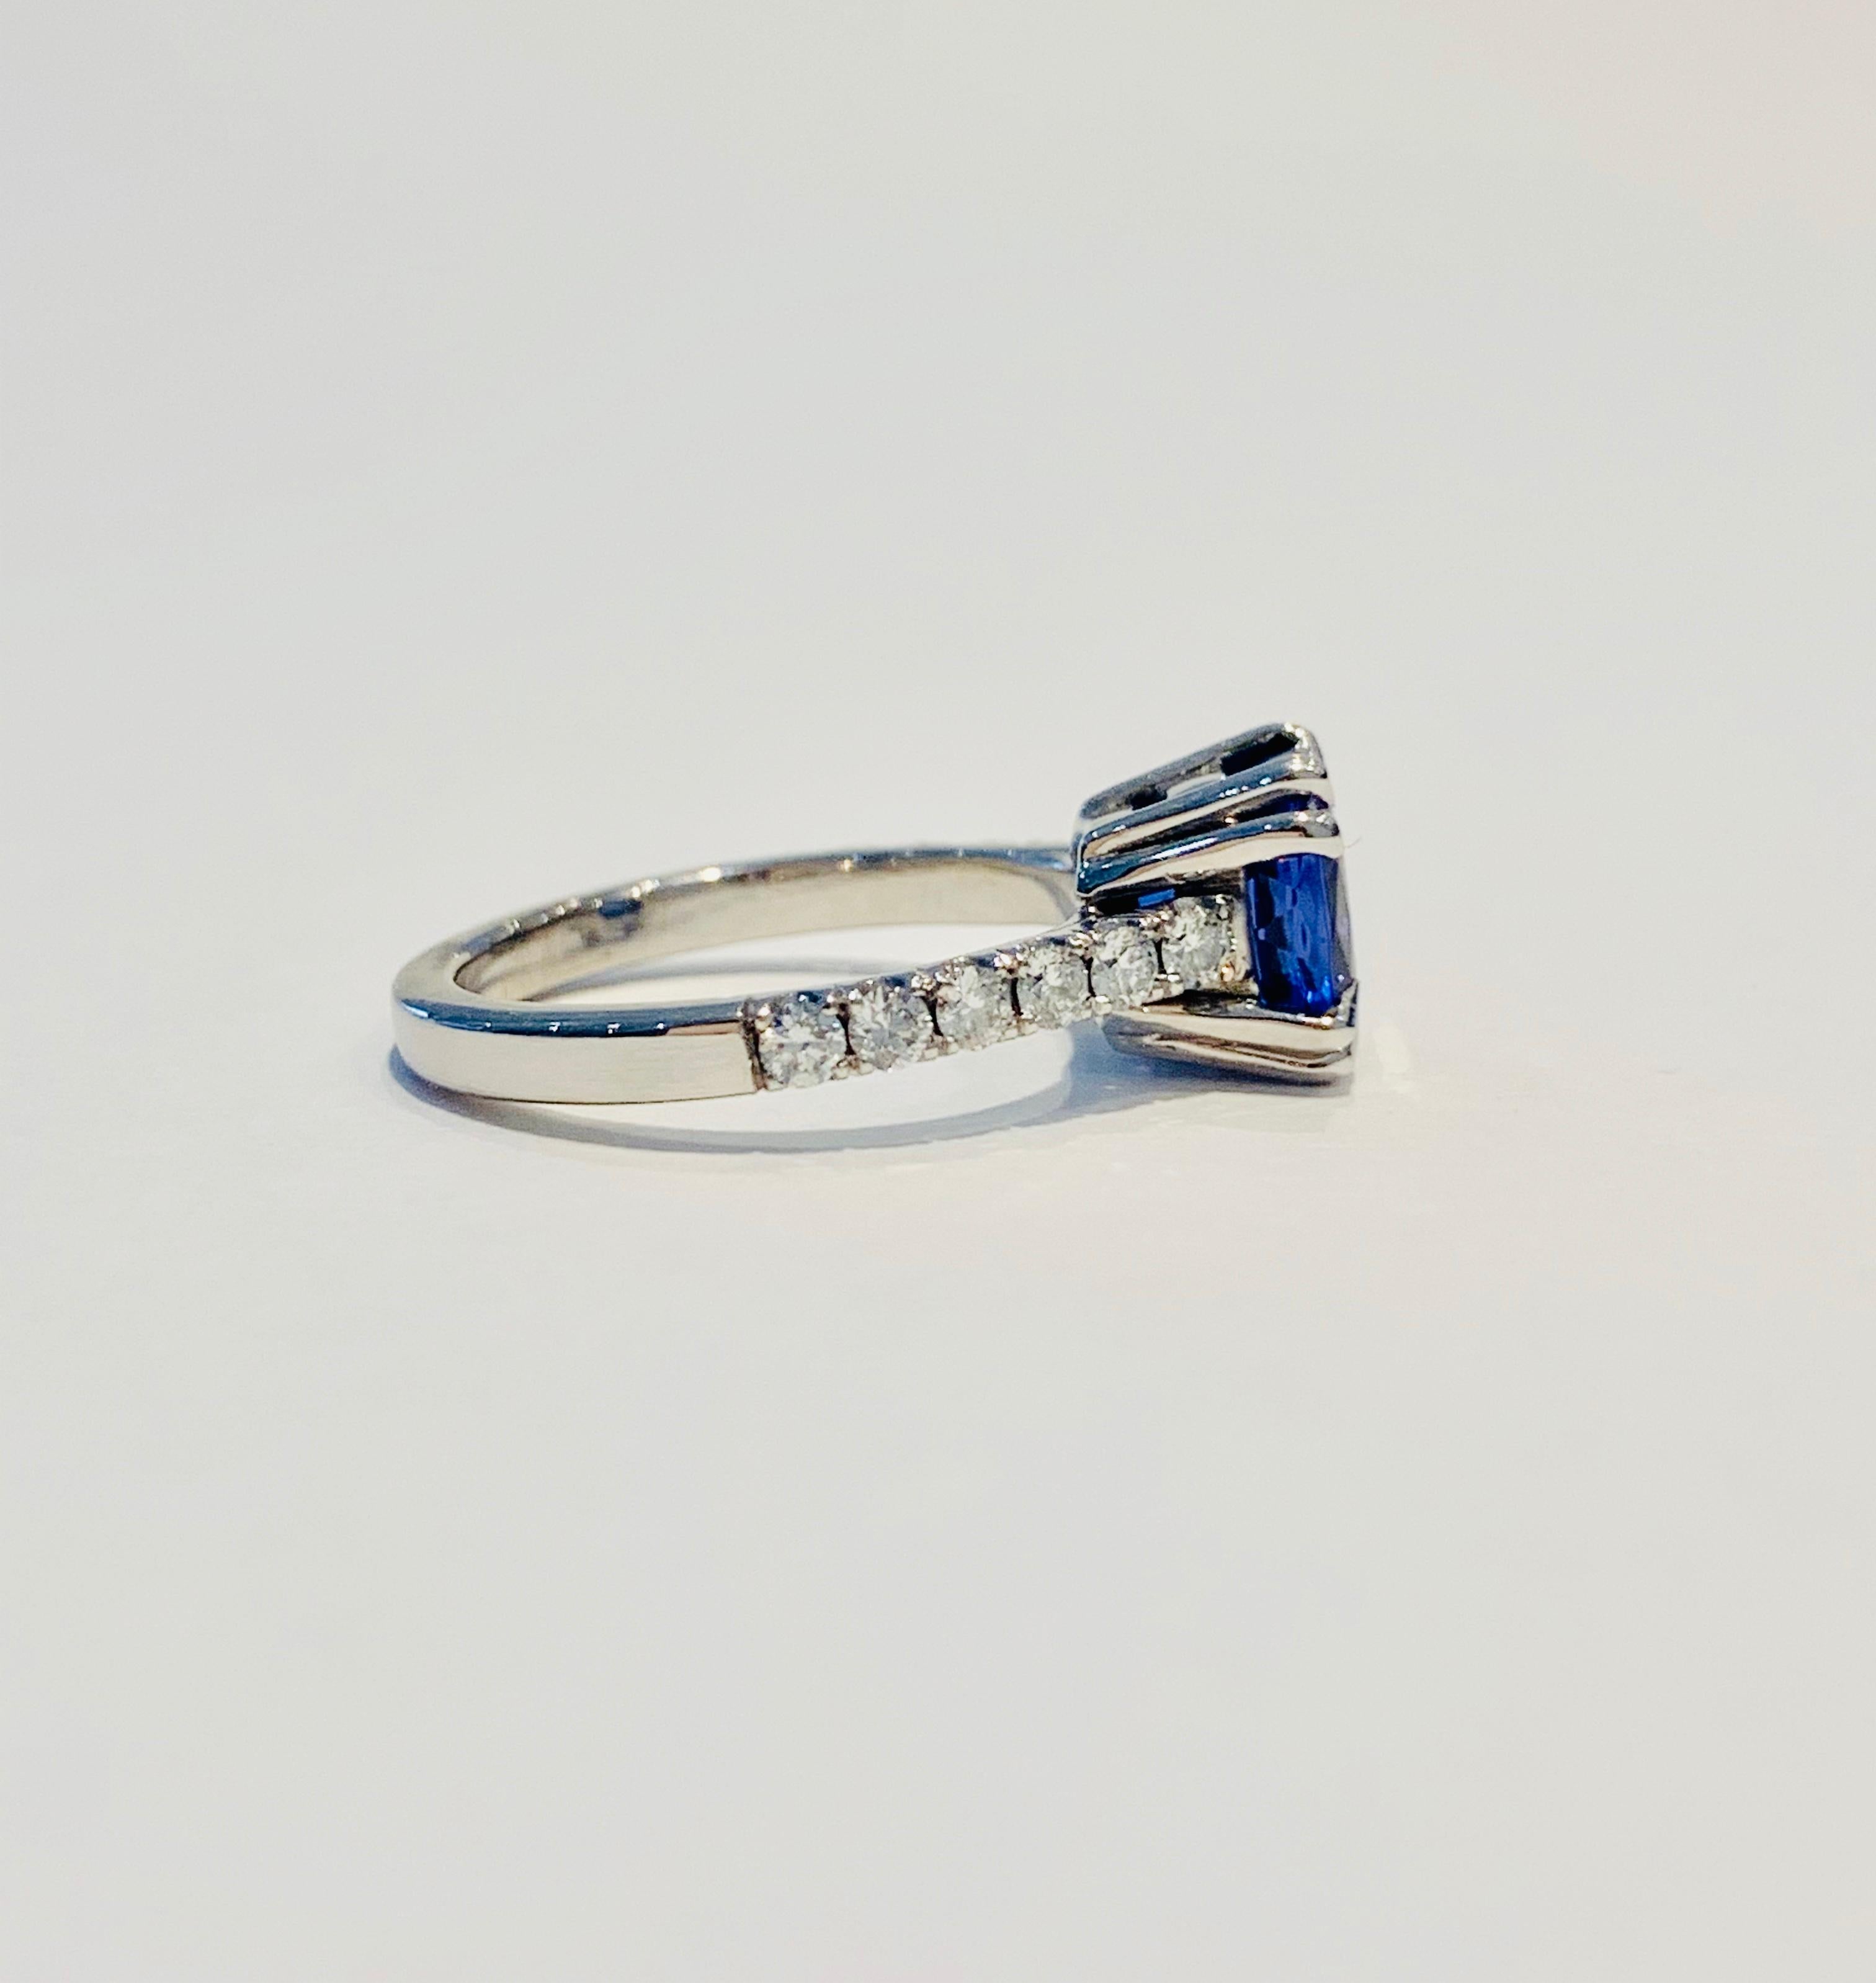 Modern Bespoke 2.69ct AAAA Cushion Cut Tanzanite and Diamond Ring in 18ct White Gold For Sale